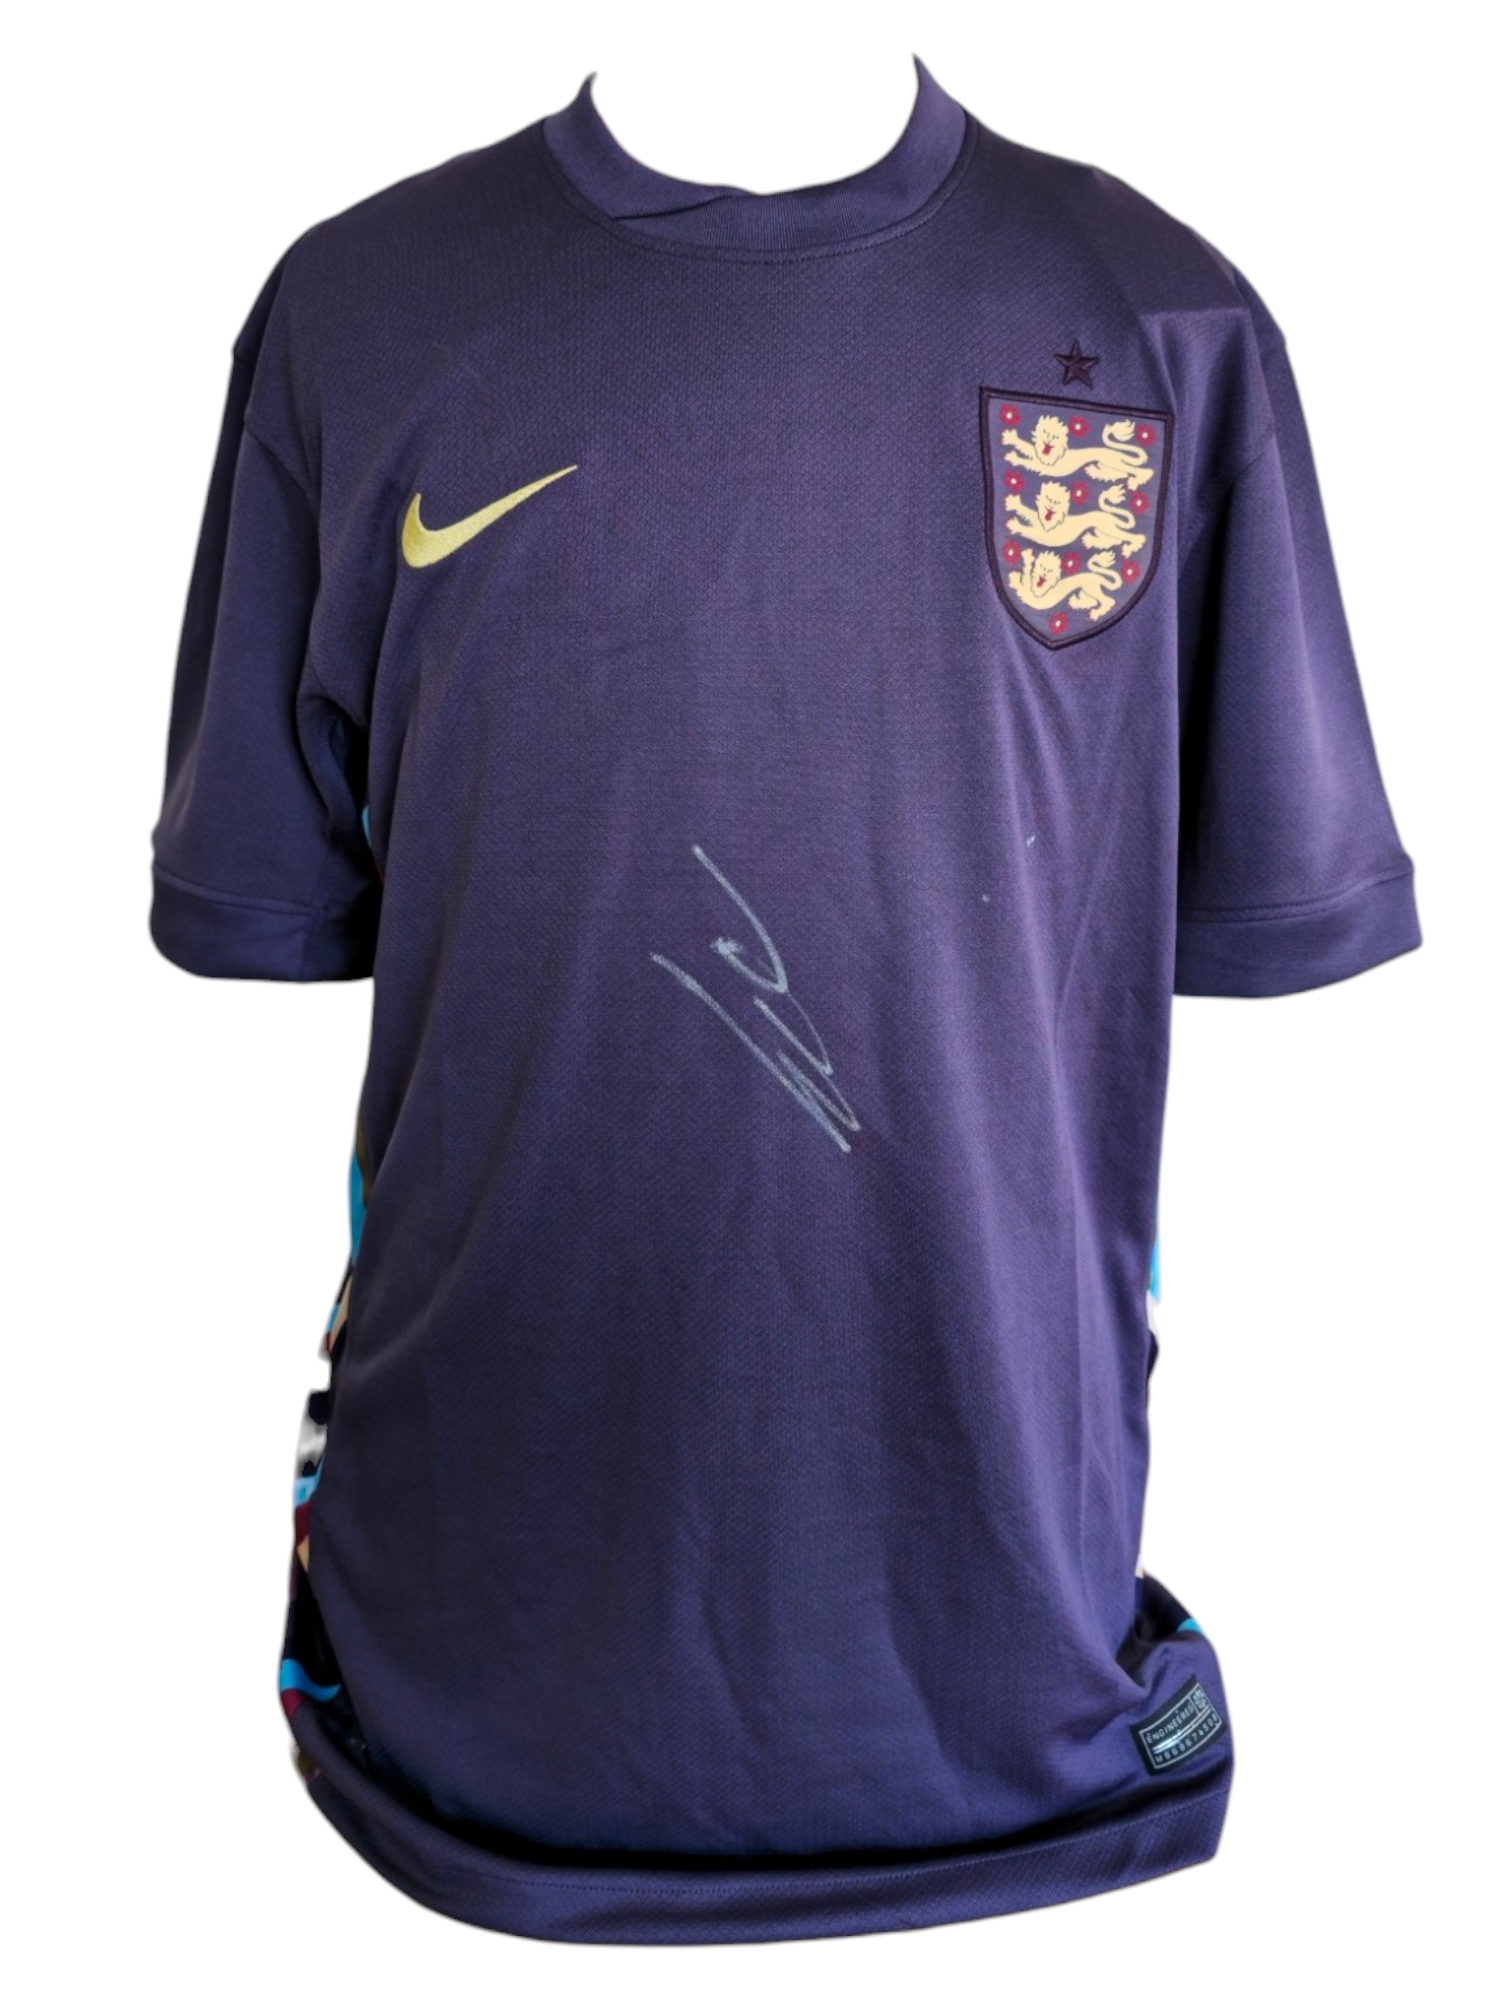 Jarrod Bowen signed England men's away shirt Nike size medium with tags. Good Condition. All